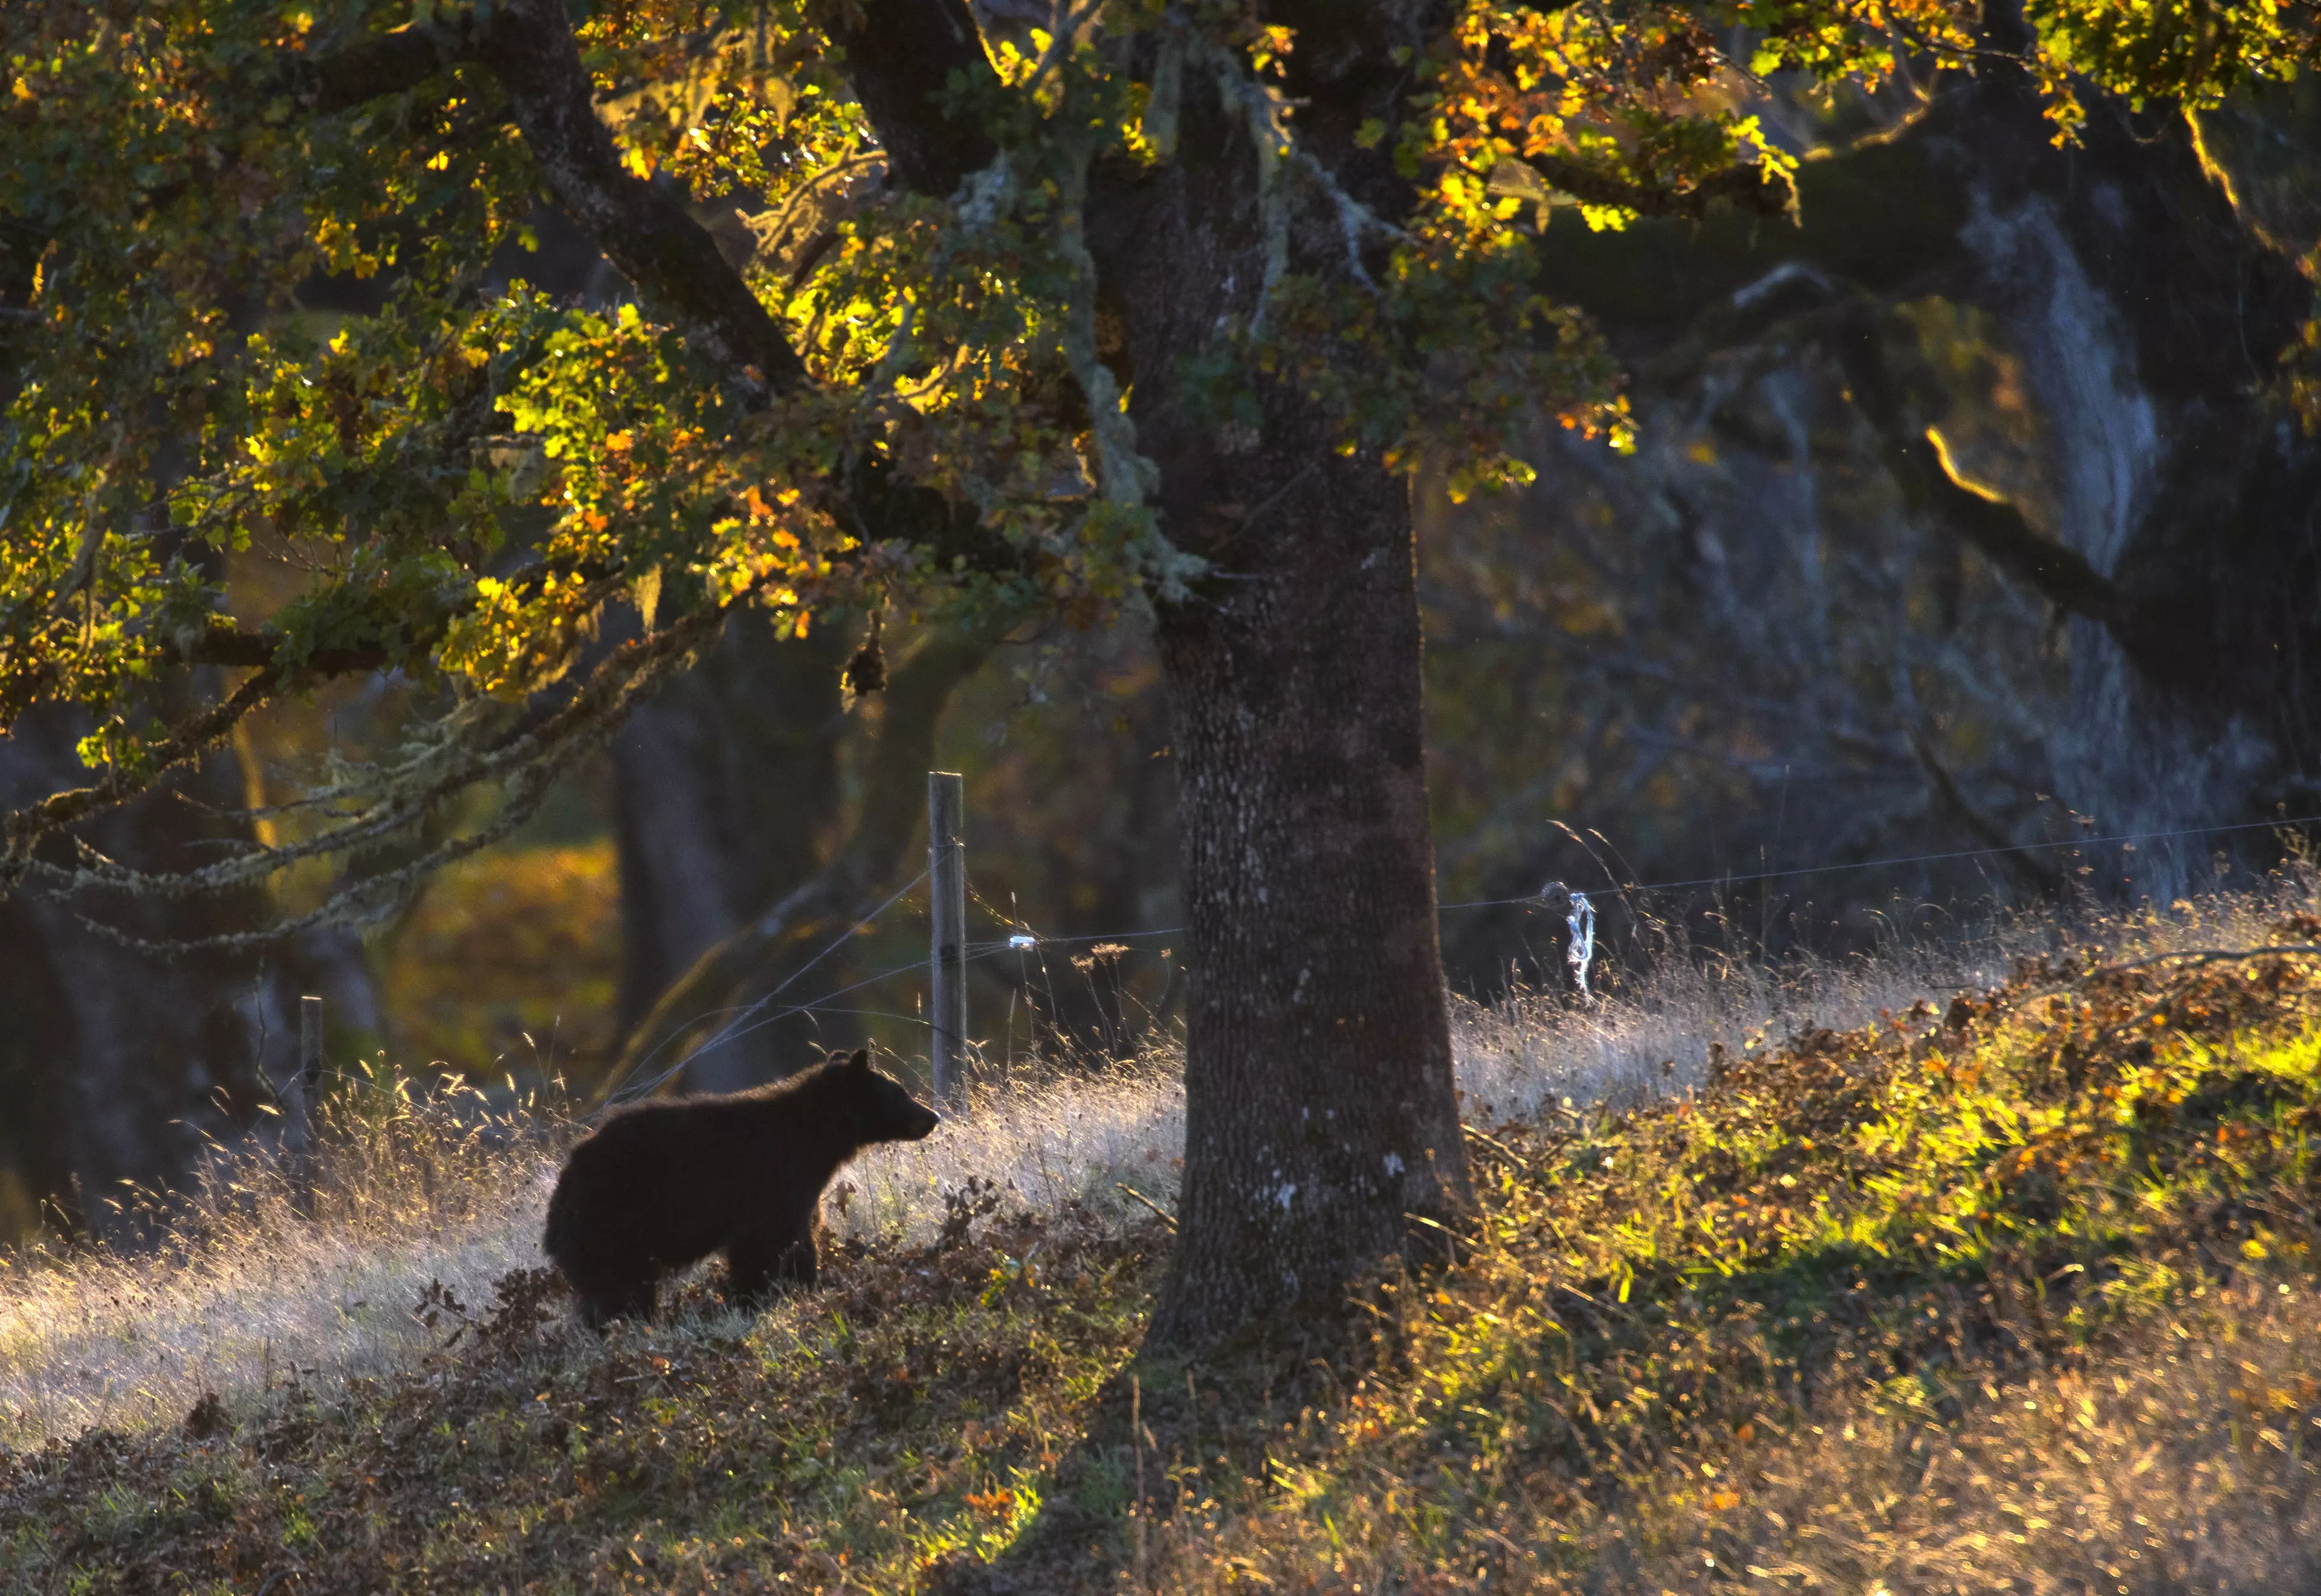 Black bears are pretty common in the area, but usually avoid humans.